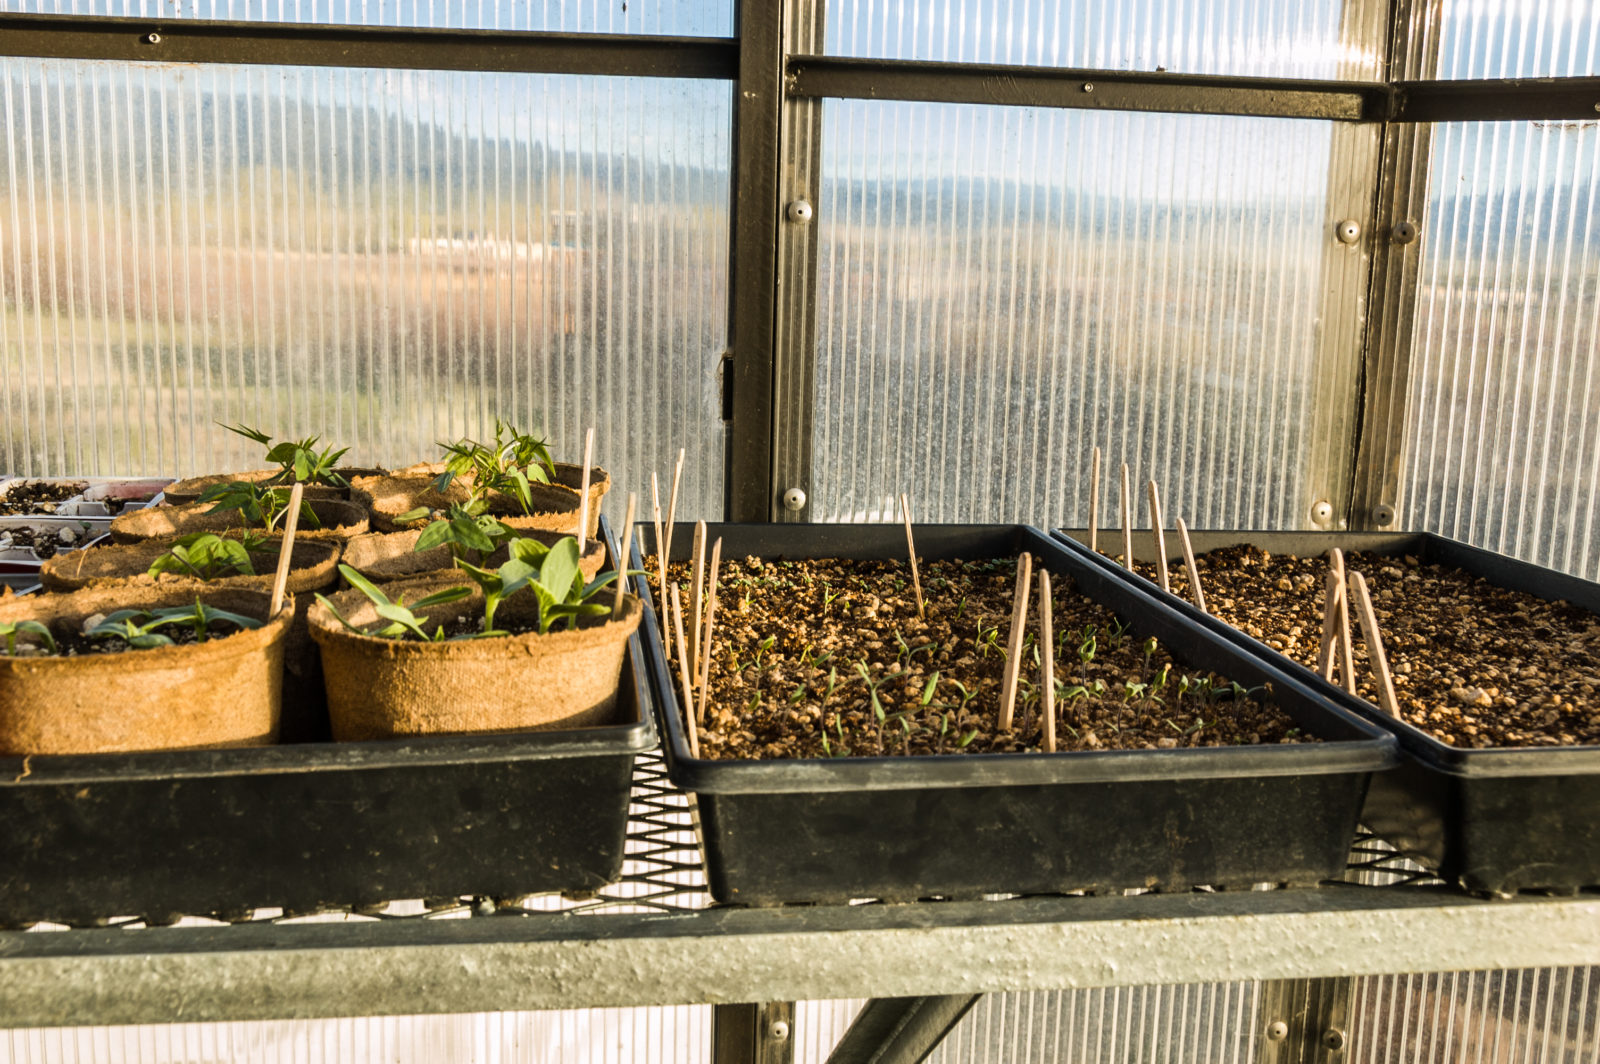 A tray of seedlings in the greenhouse as taught by garden consultant Dan Jones